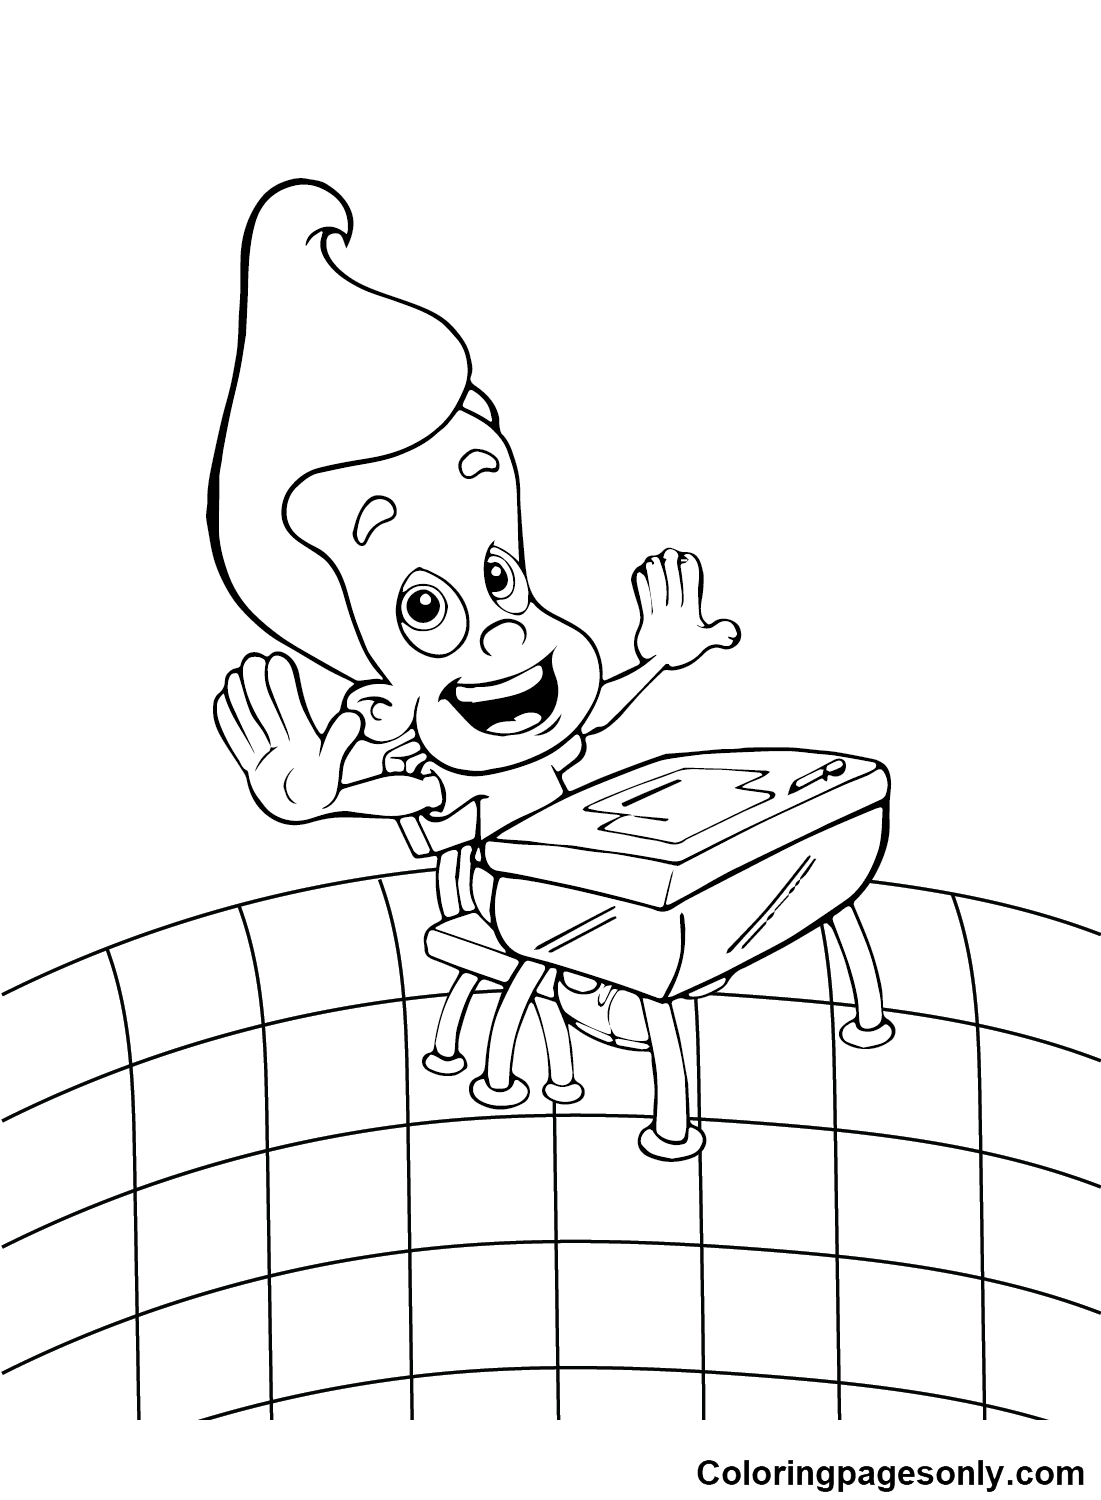 Pictures Jimmy Neutron Coloring Page